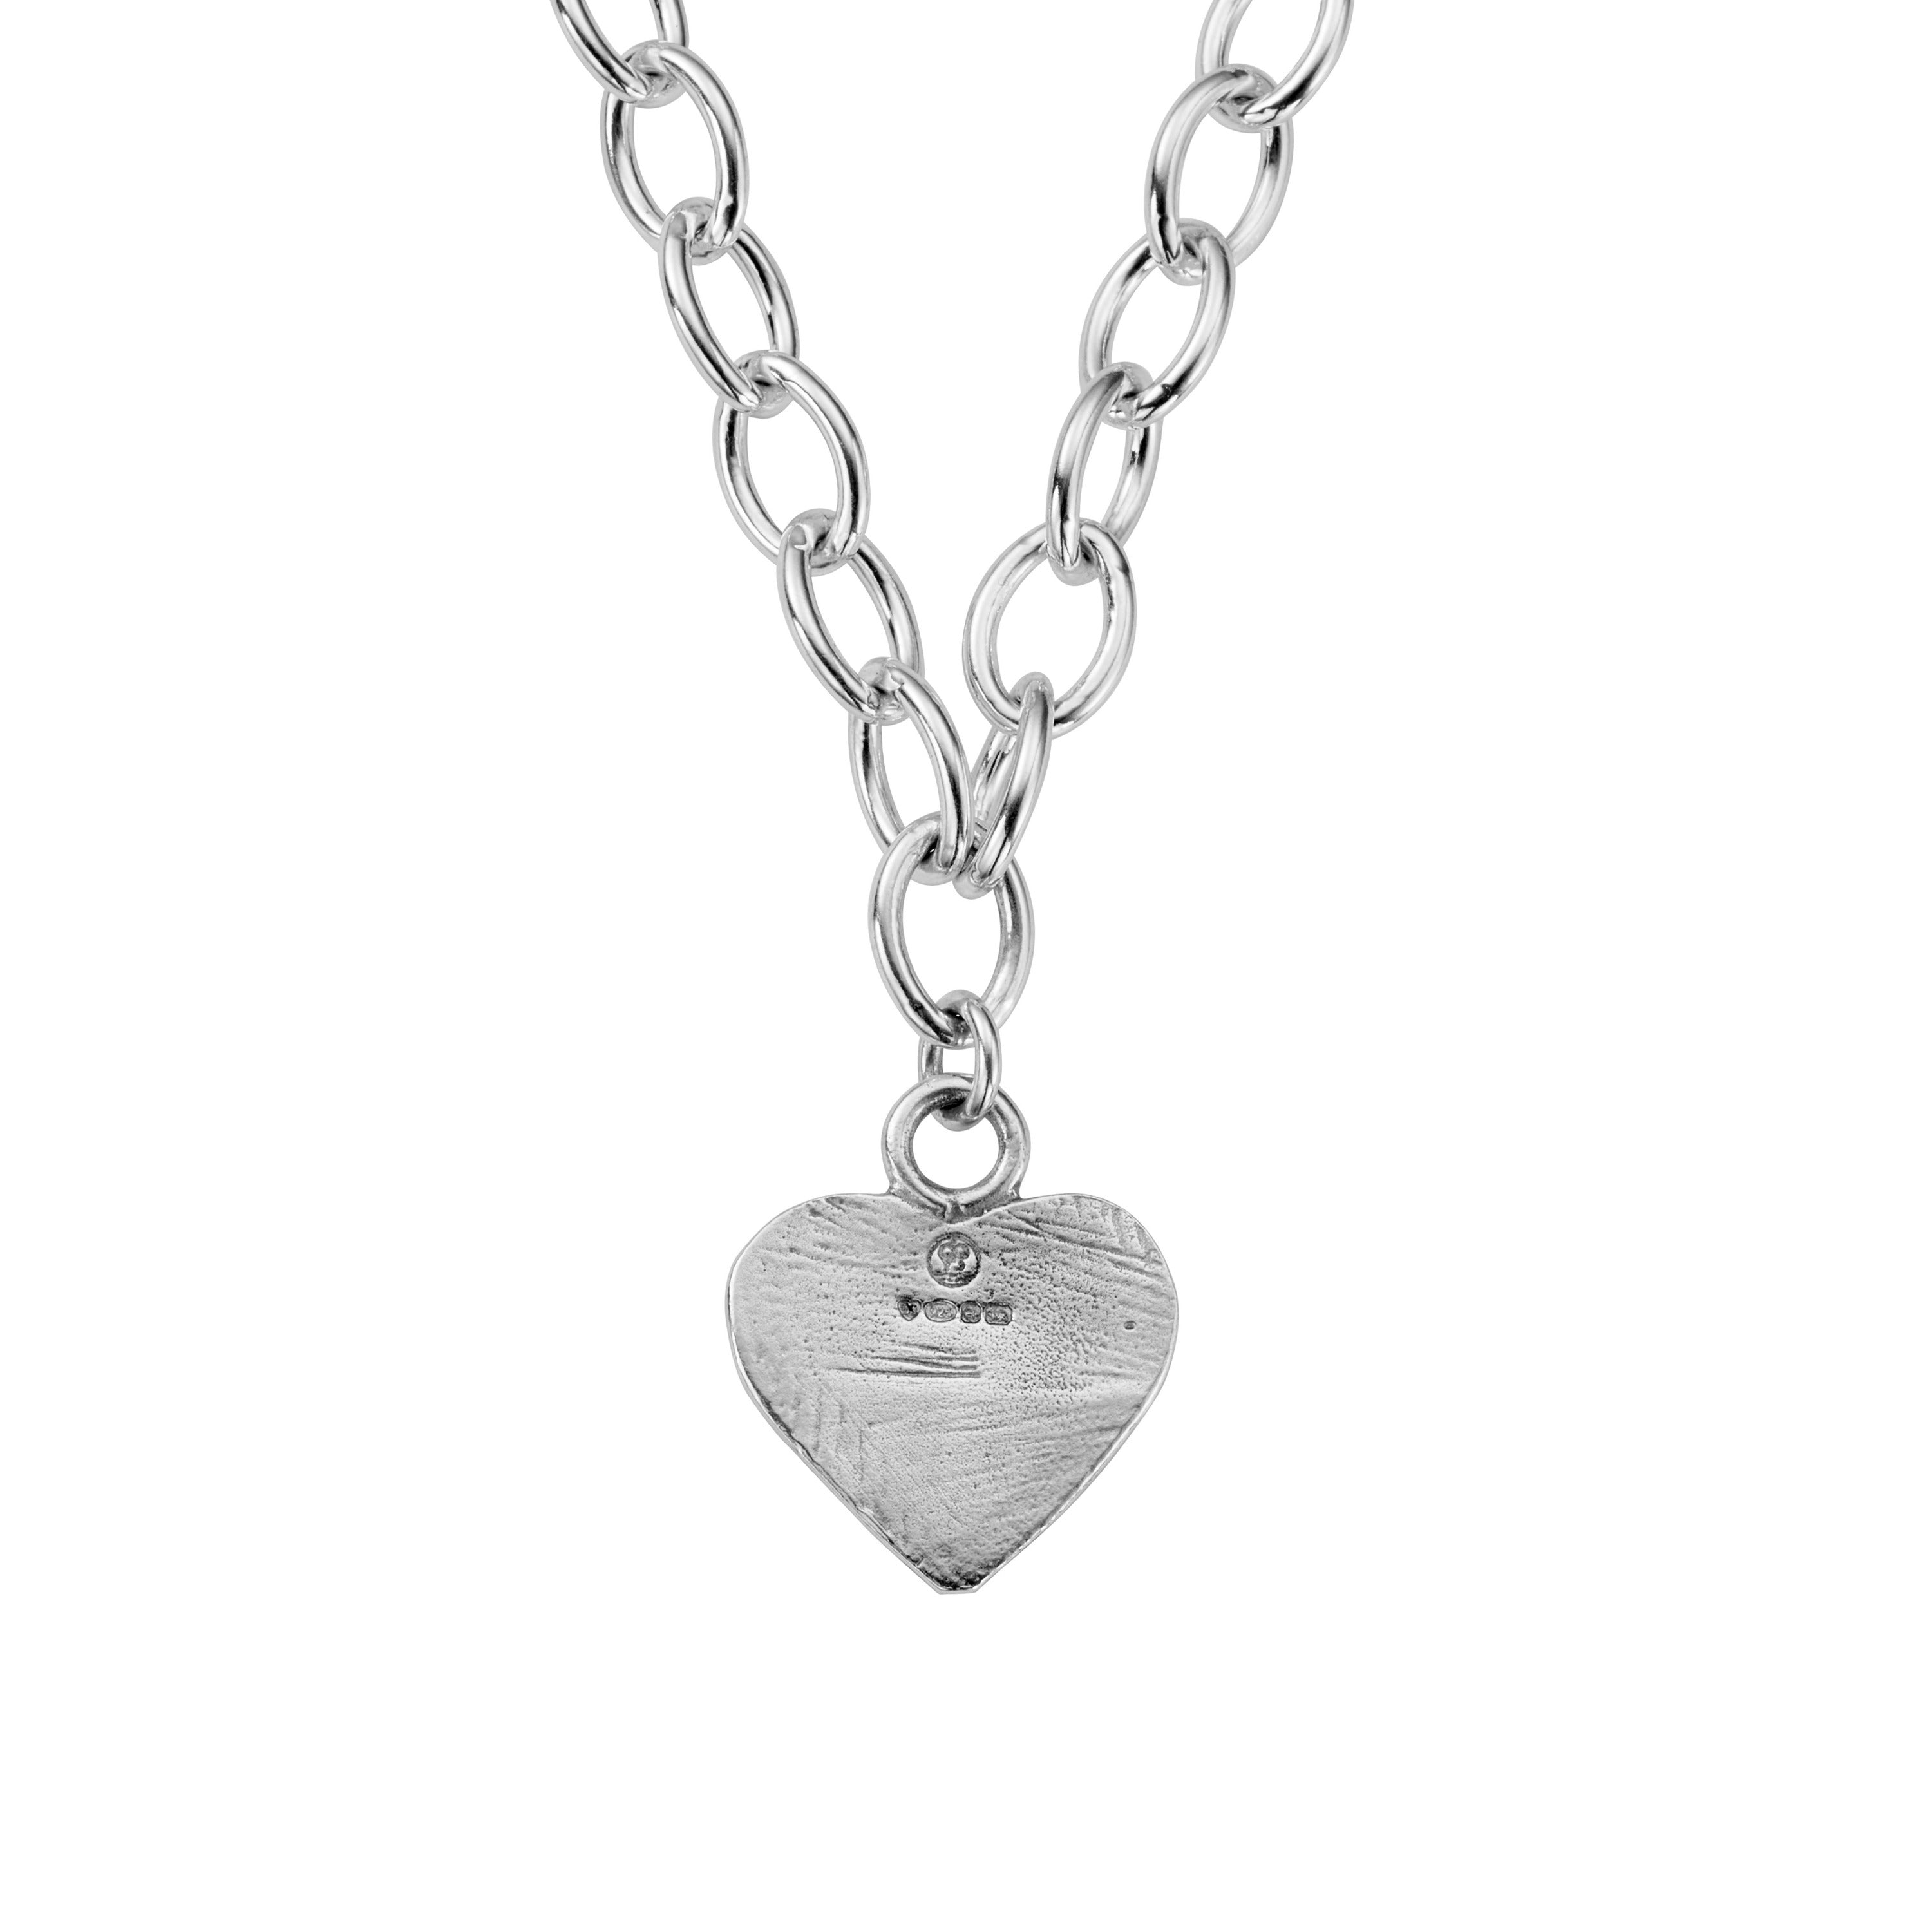 Buy The Silver Luxury Keepers Heart Necklace From British